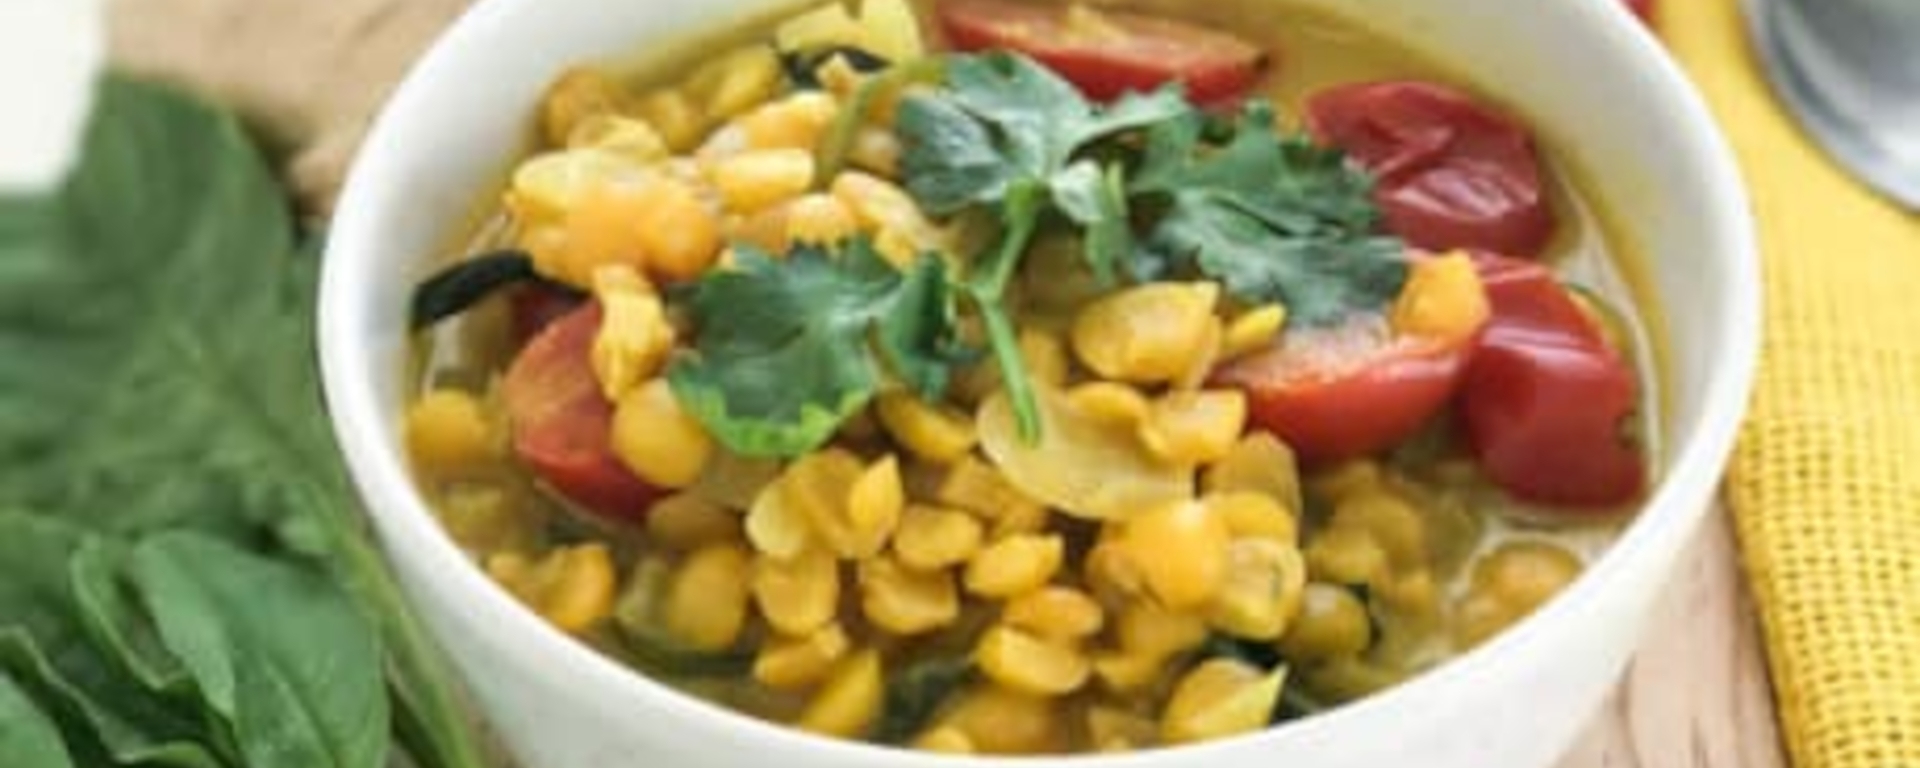 Yellow Split Peas with Spinach and Cherry Tomatoes Indian Style